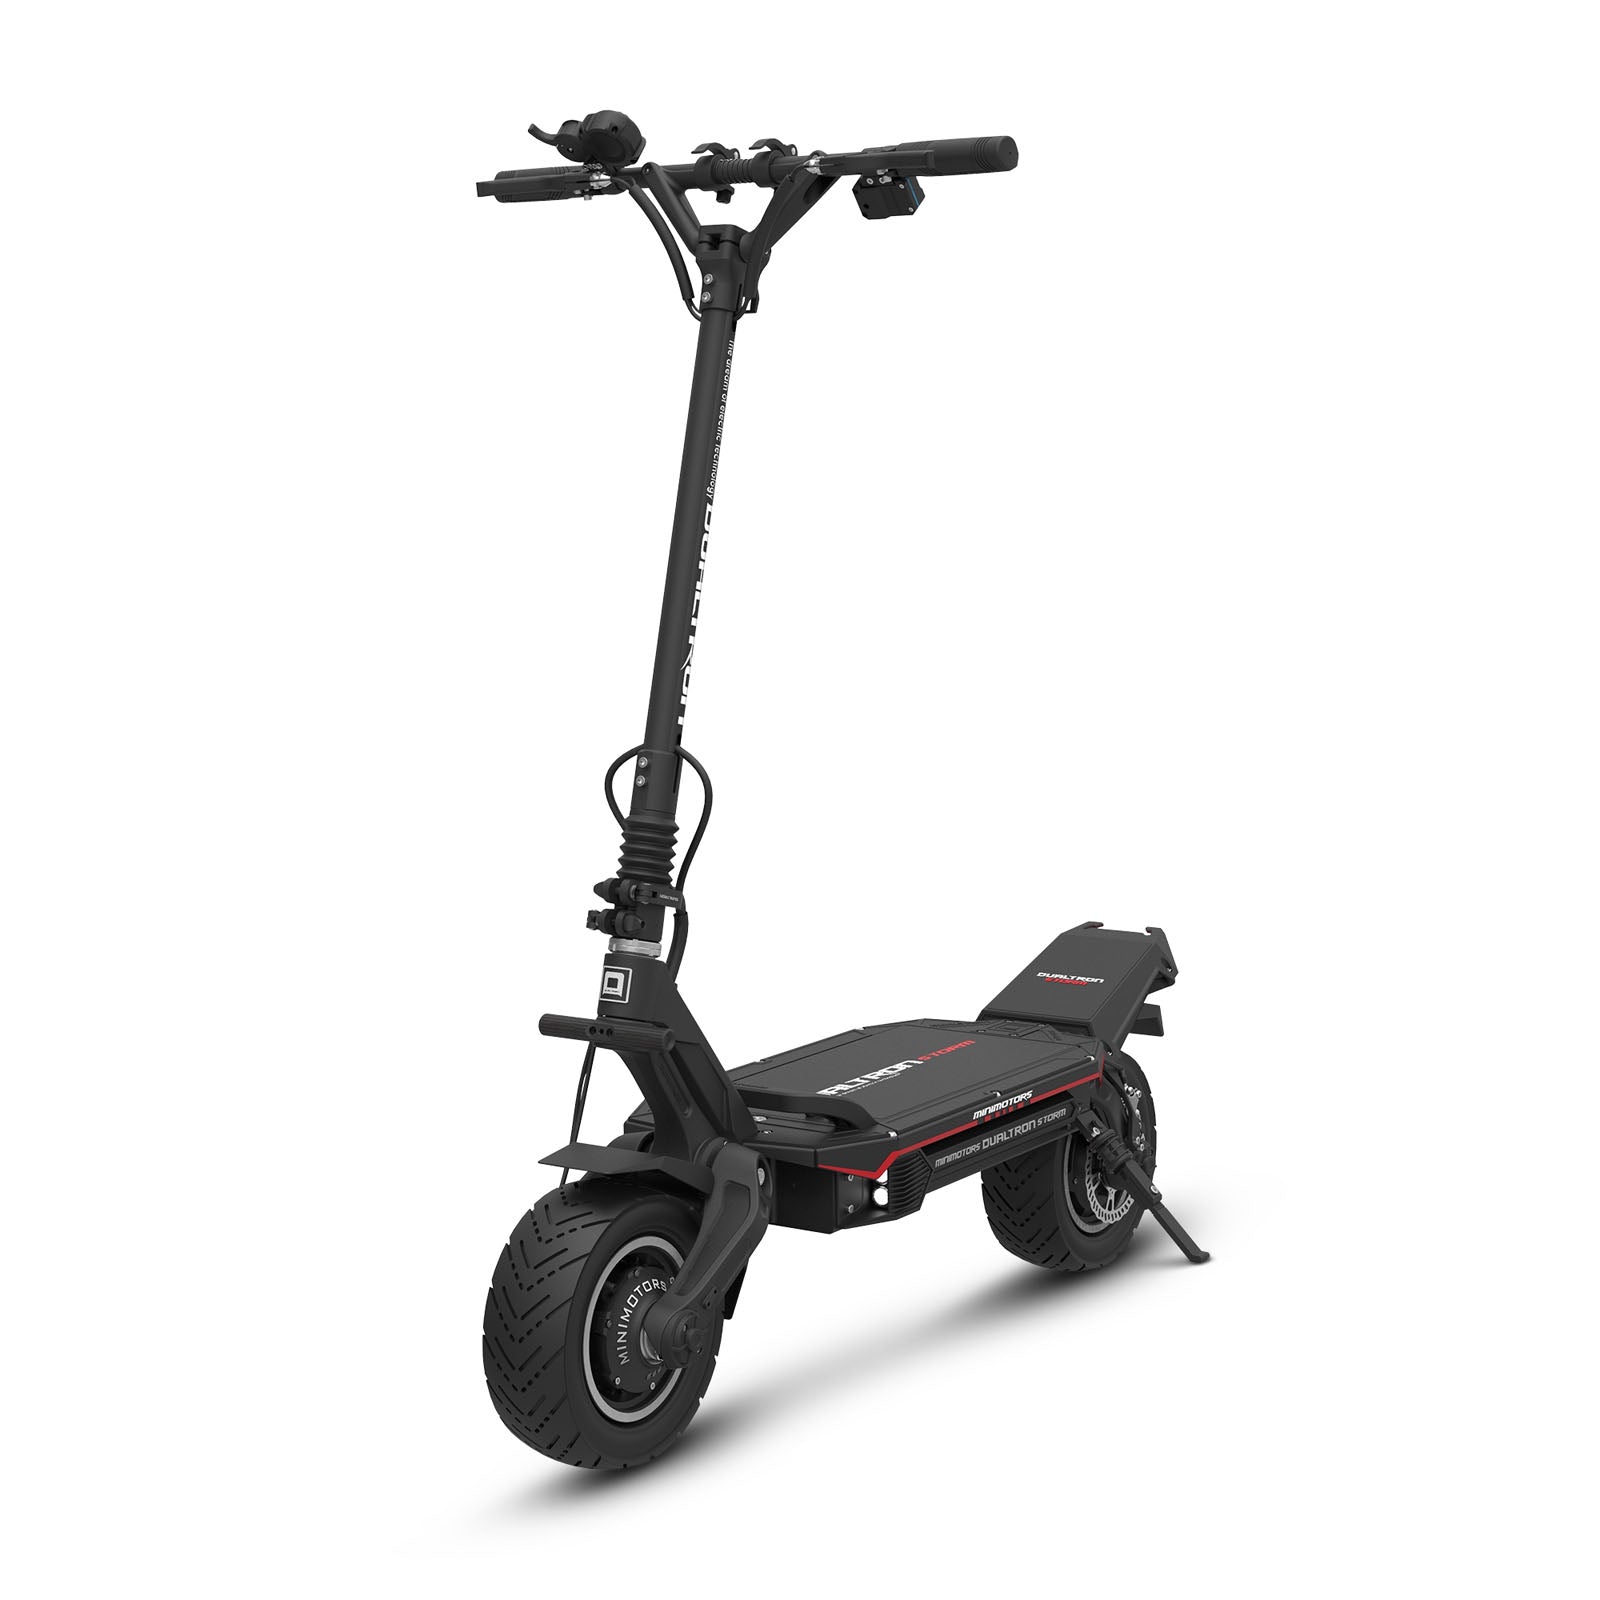 Storm Ltd Scooter - Premium Scooter - Fast and Reliable - Minimotors USA